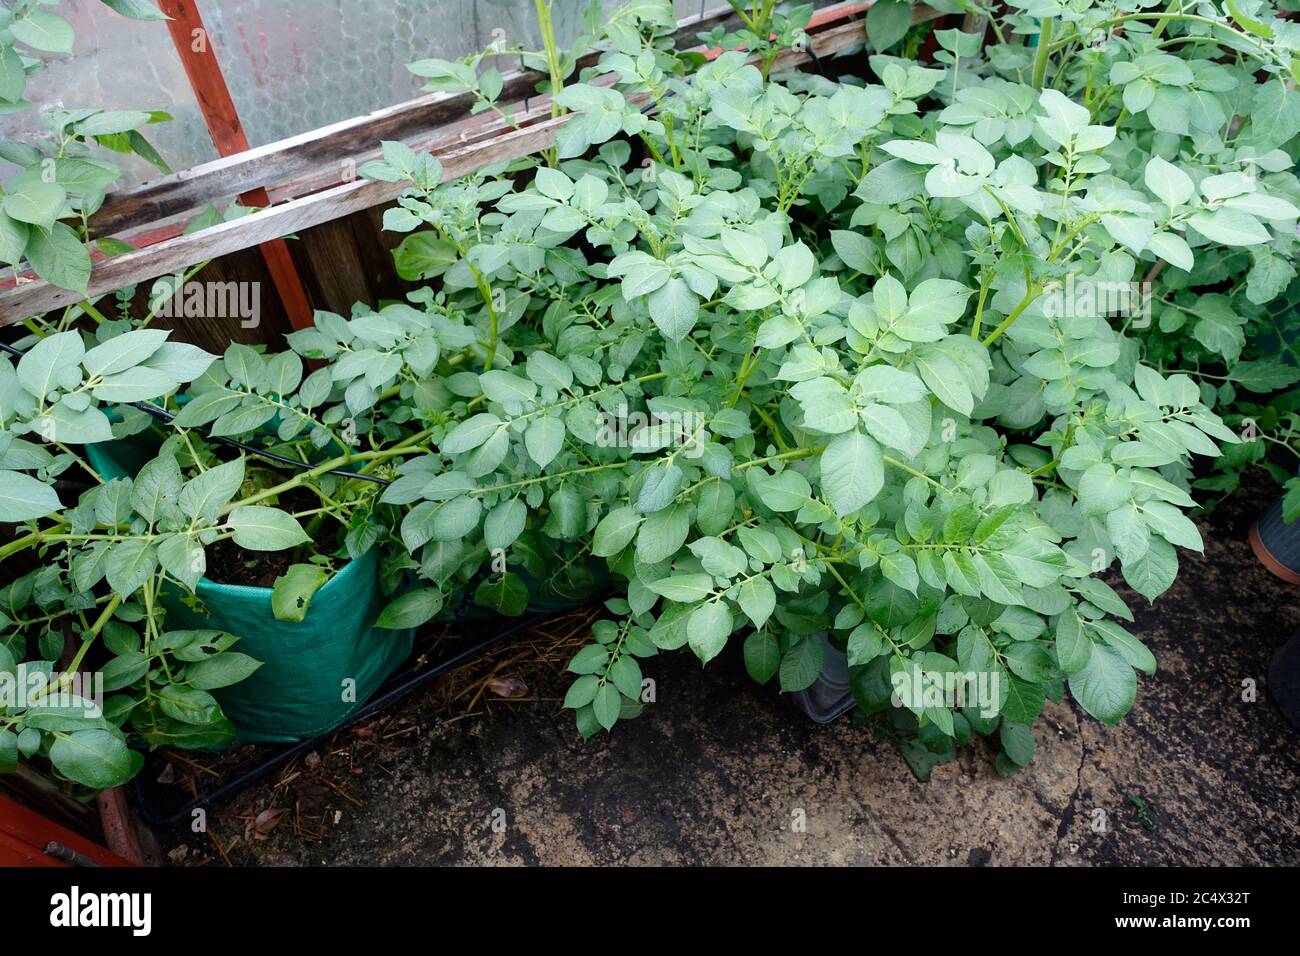 Growing Potatoes In Bags High Resolution Stock Photography and Images -  Alamy